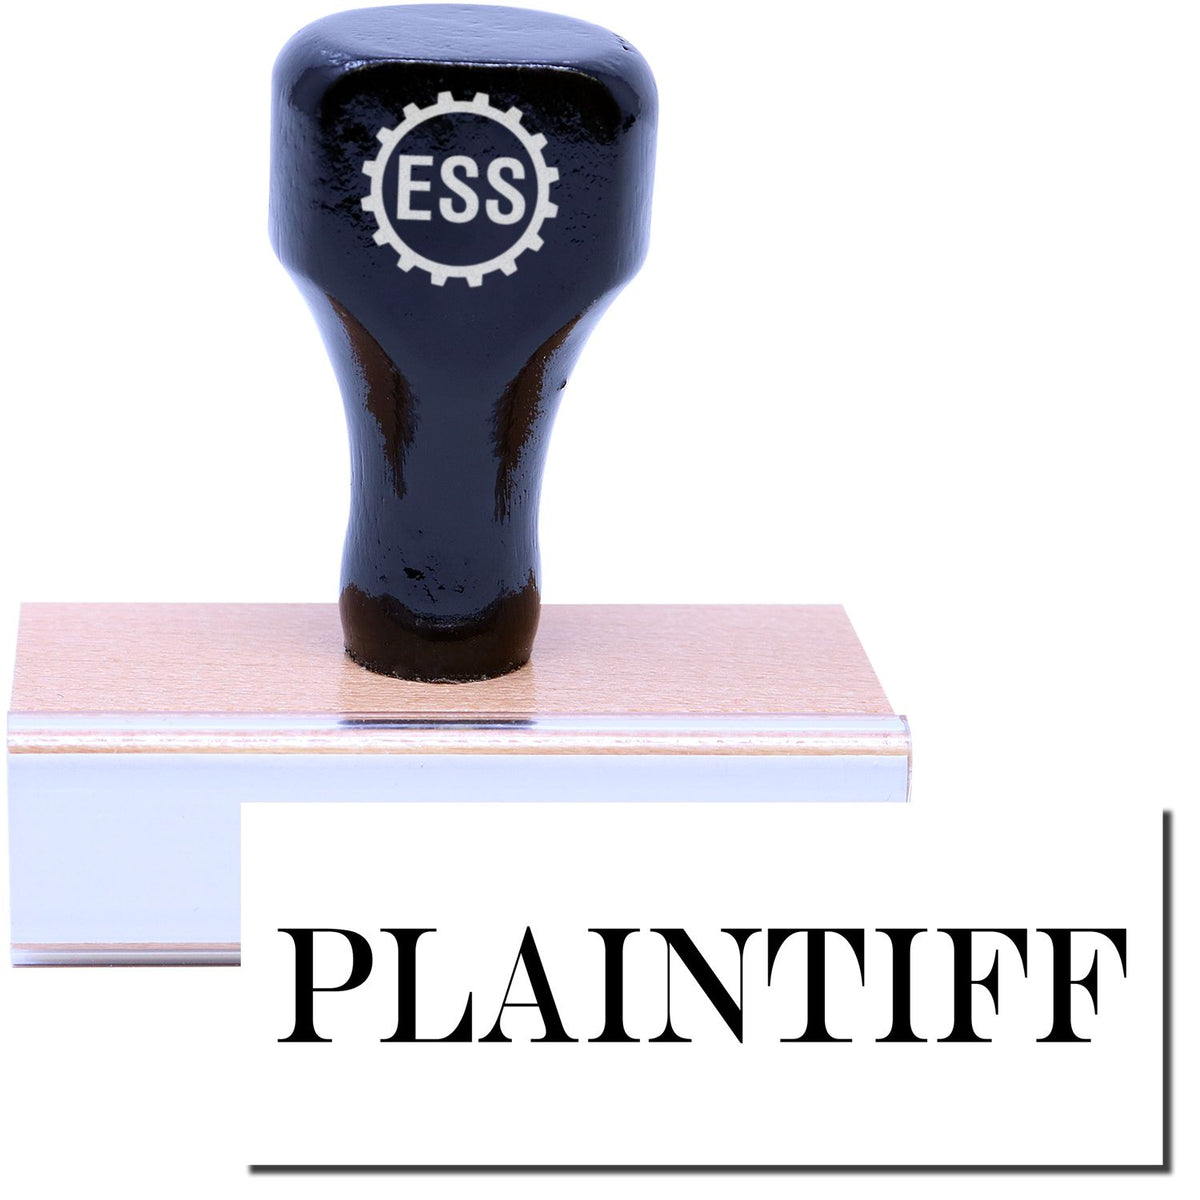 A stock office rubber stamp with a stamped image showing how the text &quot;PLAINTIFF&quot; in a large font is displayed after stamping.